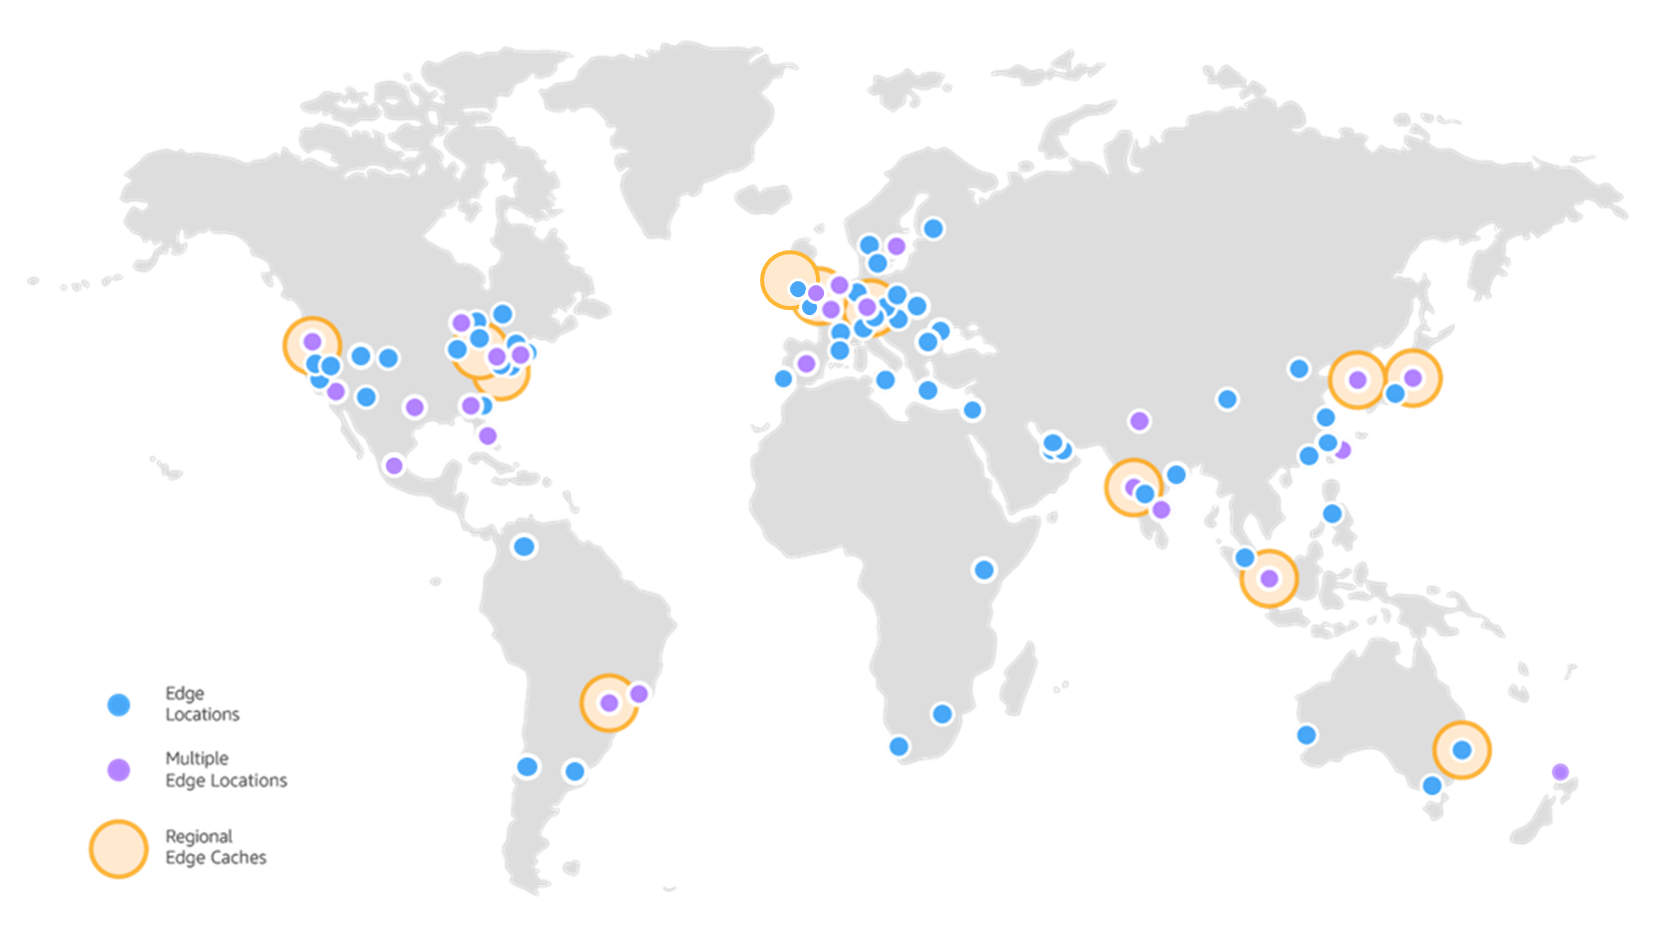 CloudFront Distribution Map  [https://aws.amazon.com/cloudfront/features/](https://aws.amazon.com/cloudfront/features/)